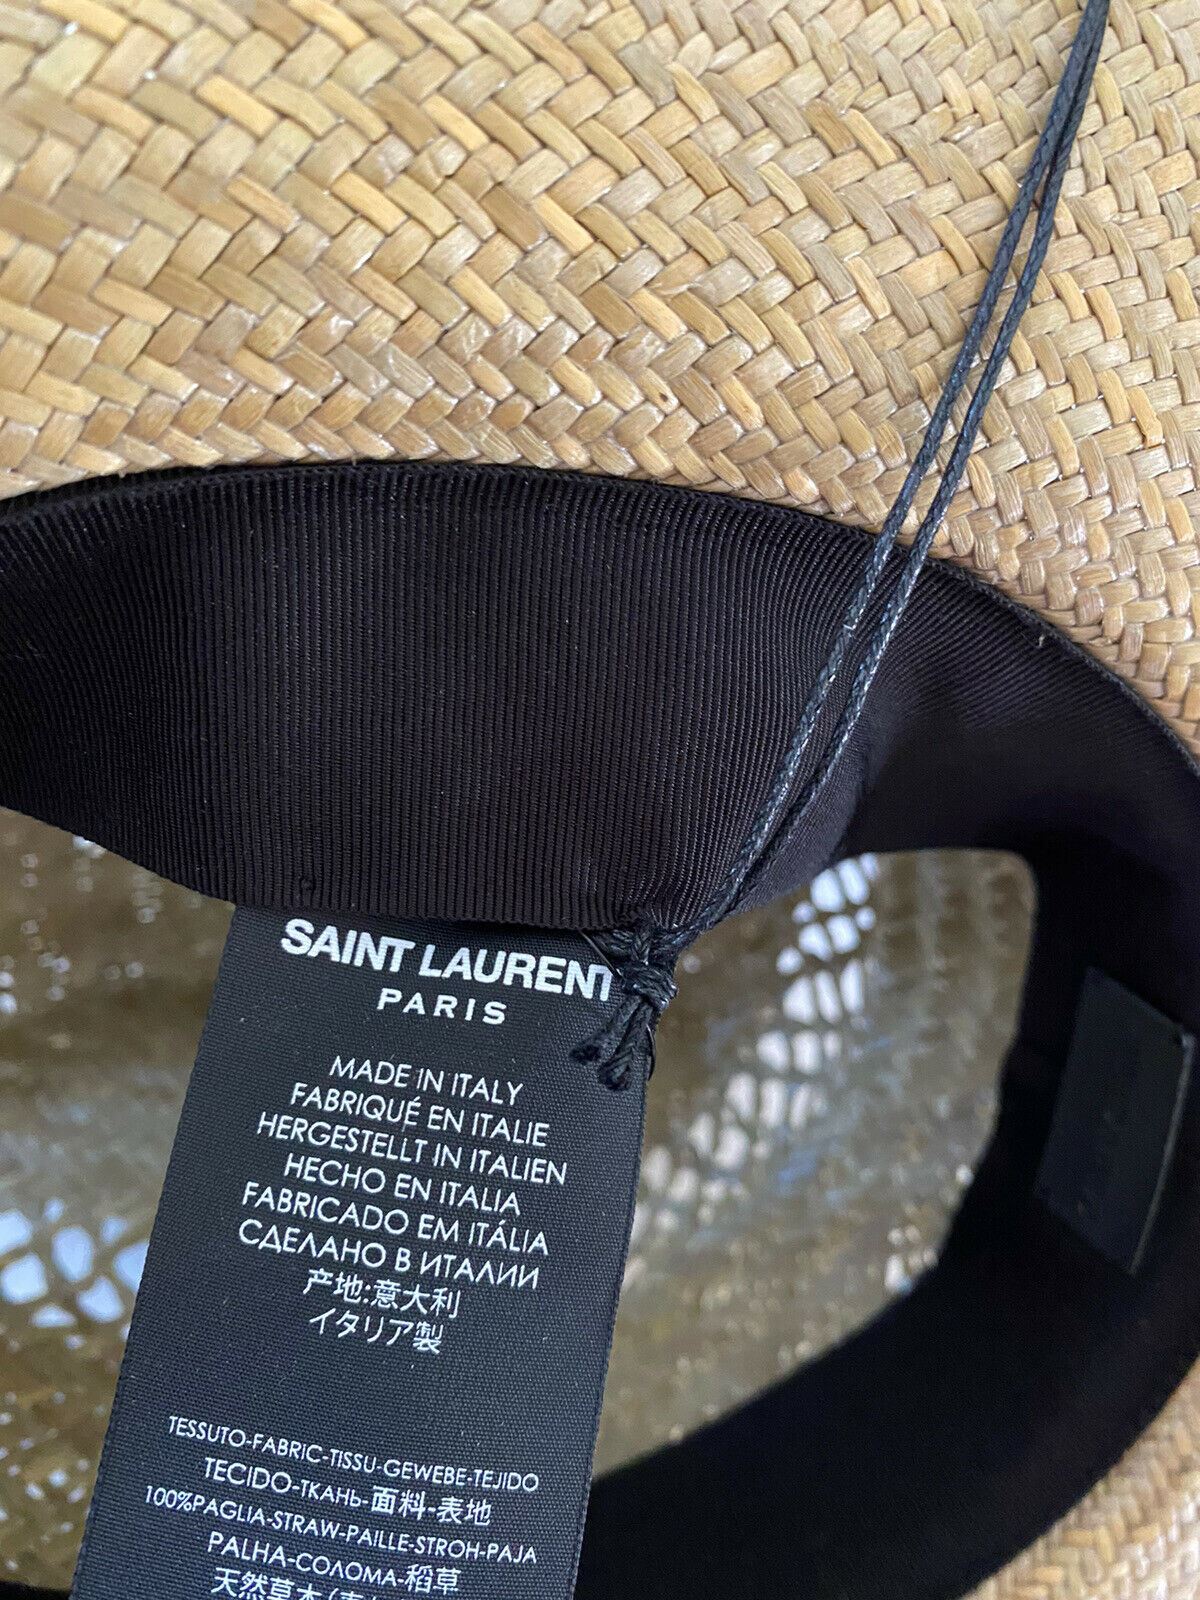 NWT $895 Saint Laurent Straw Cowboy Hat With Leather and Feathers Brown XL